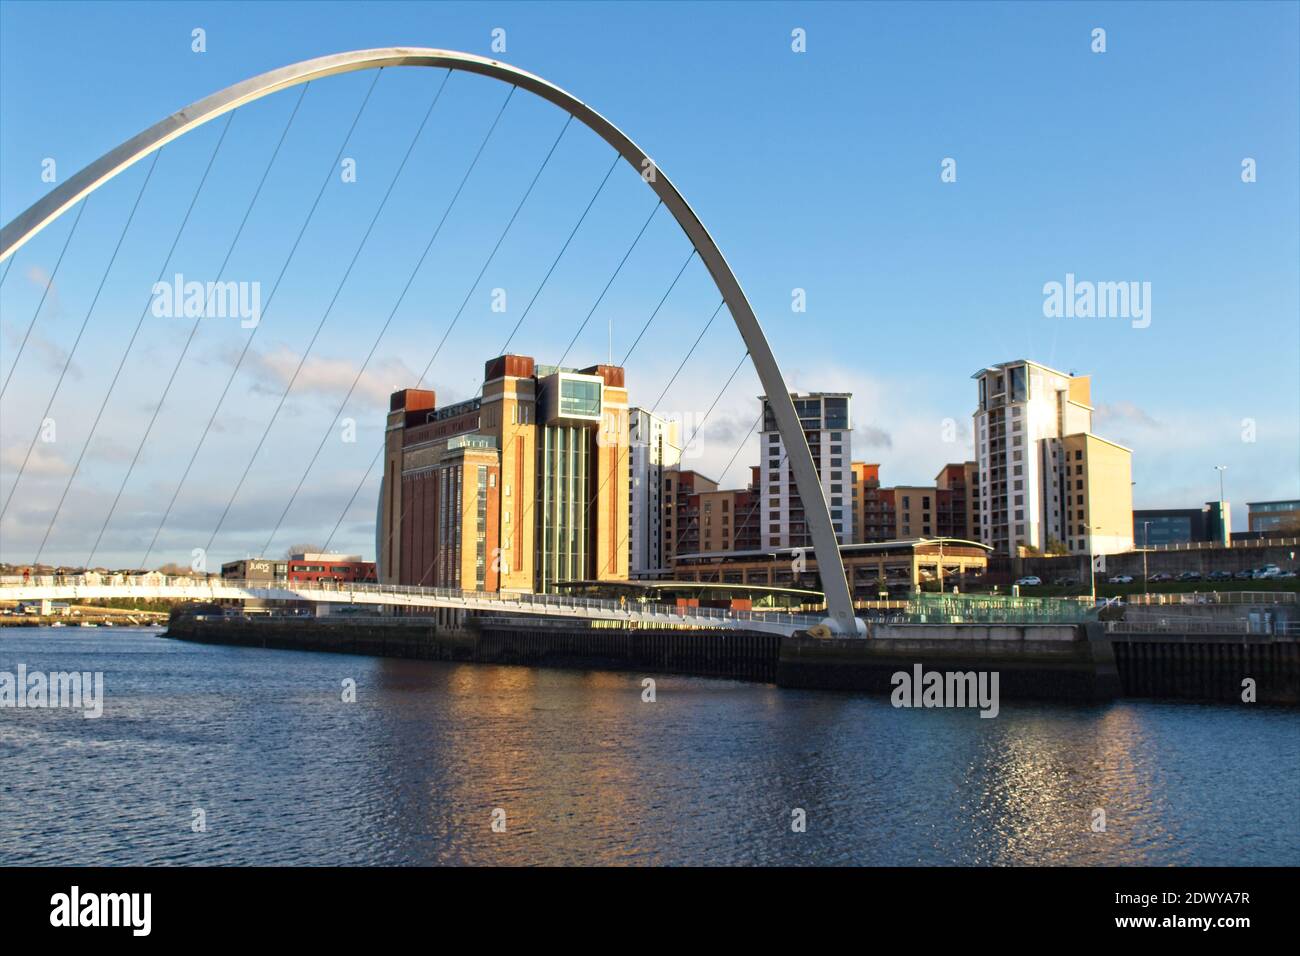 The Gateshead Millennium Bridge spans the River Tyne from Newcastle to the old Baltic Flour Mill building. Stock Photo